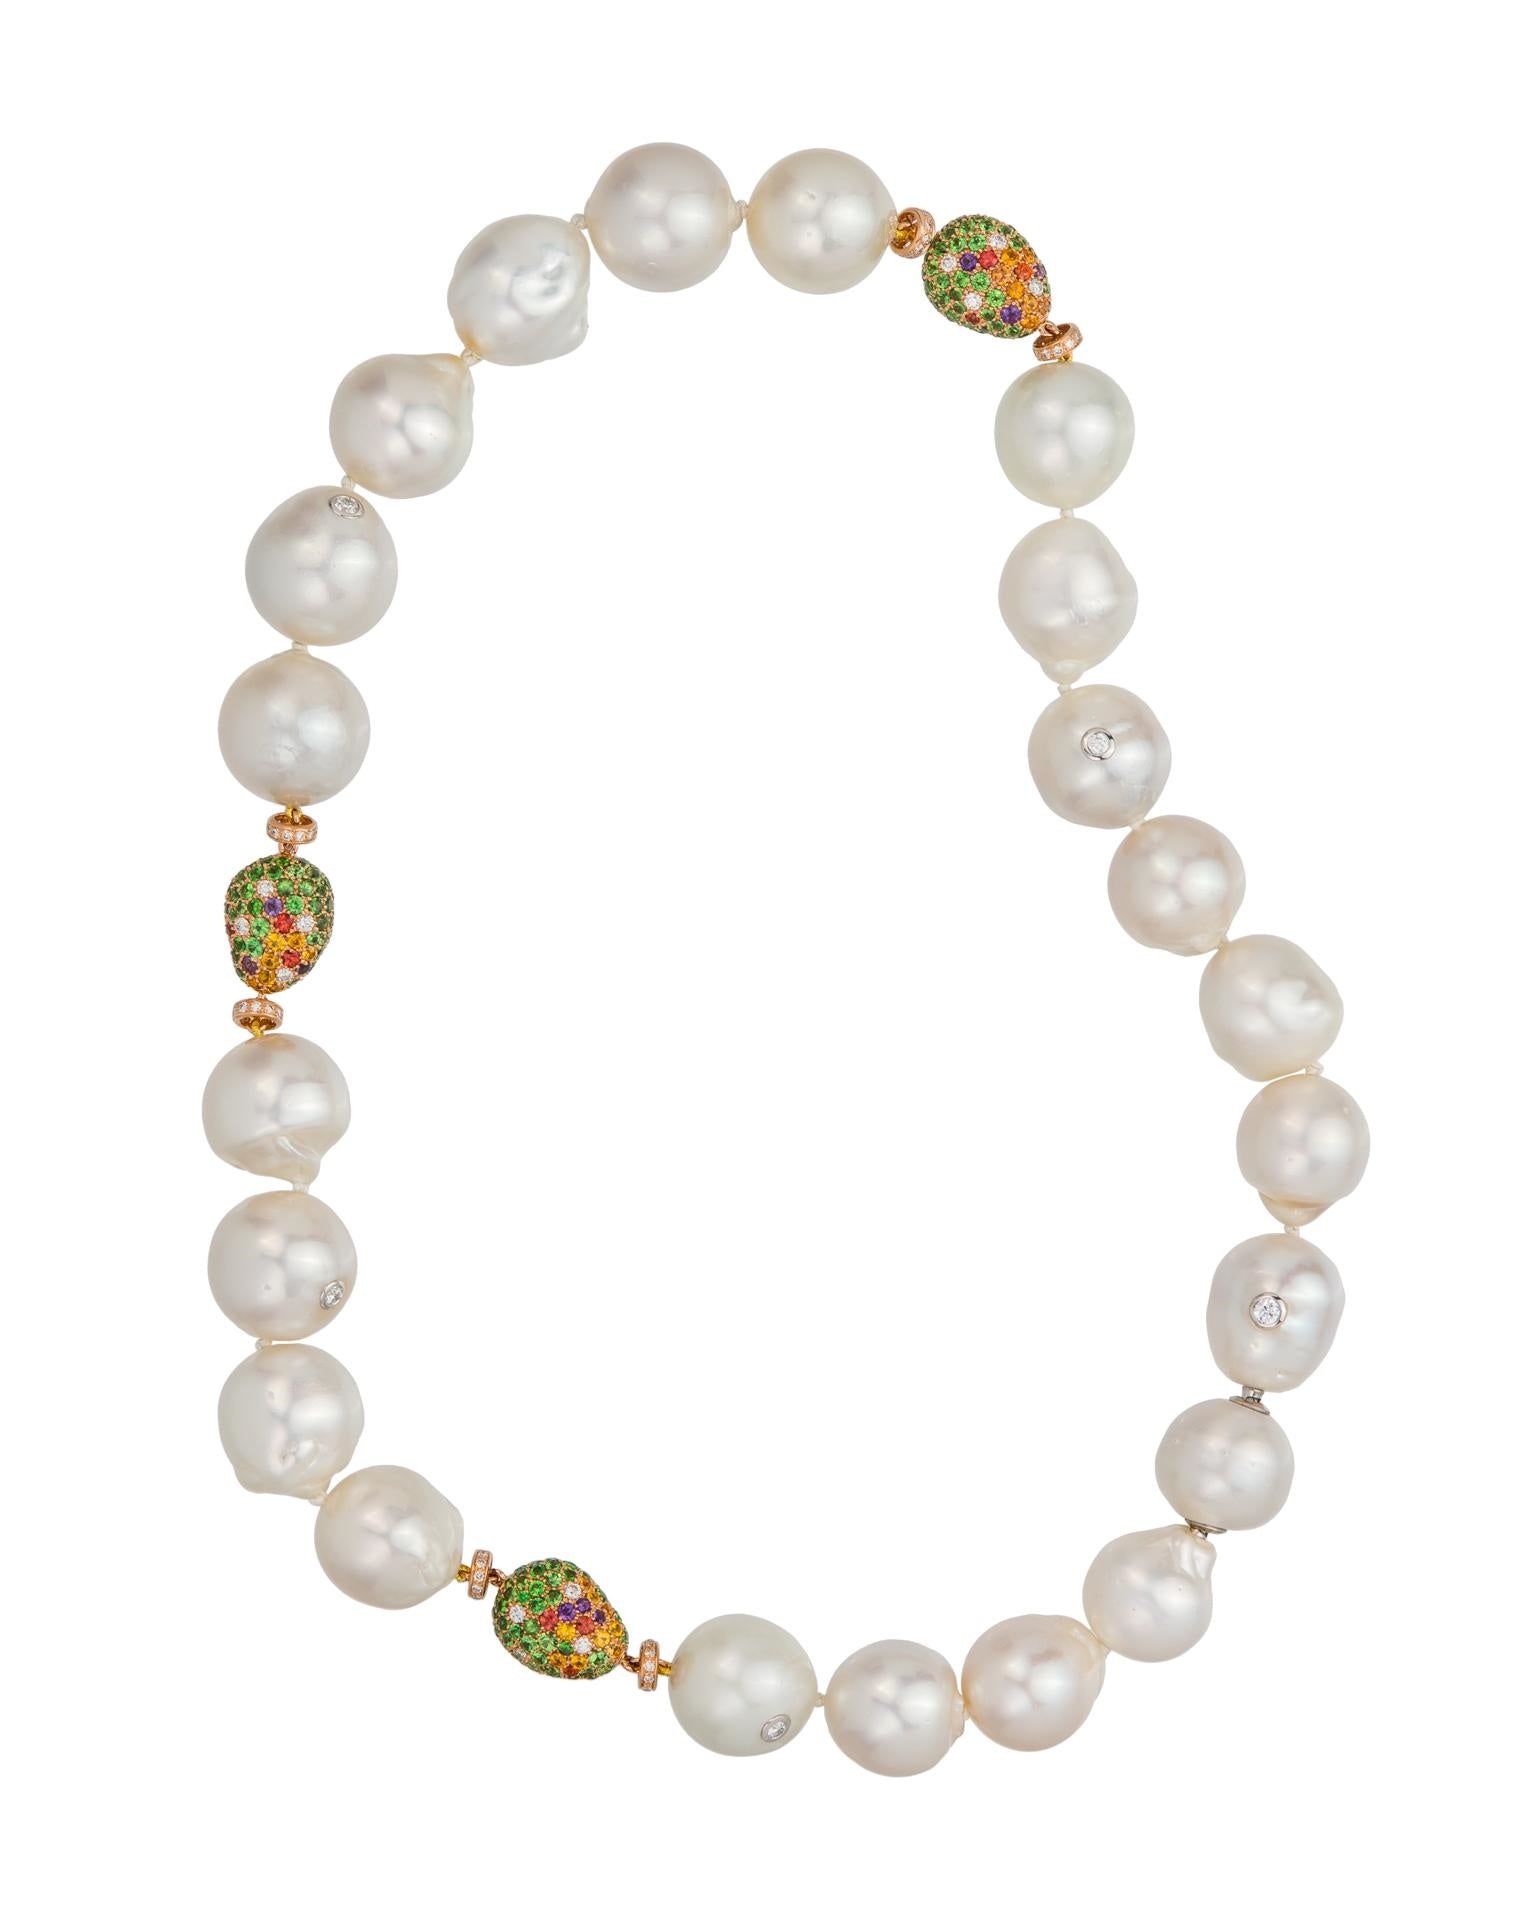 Australian South Sea pearl strand with three 'pebbles' pave set with a